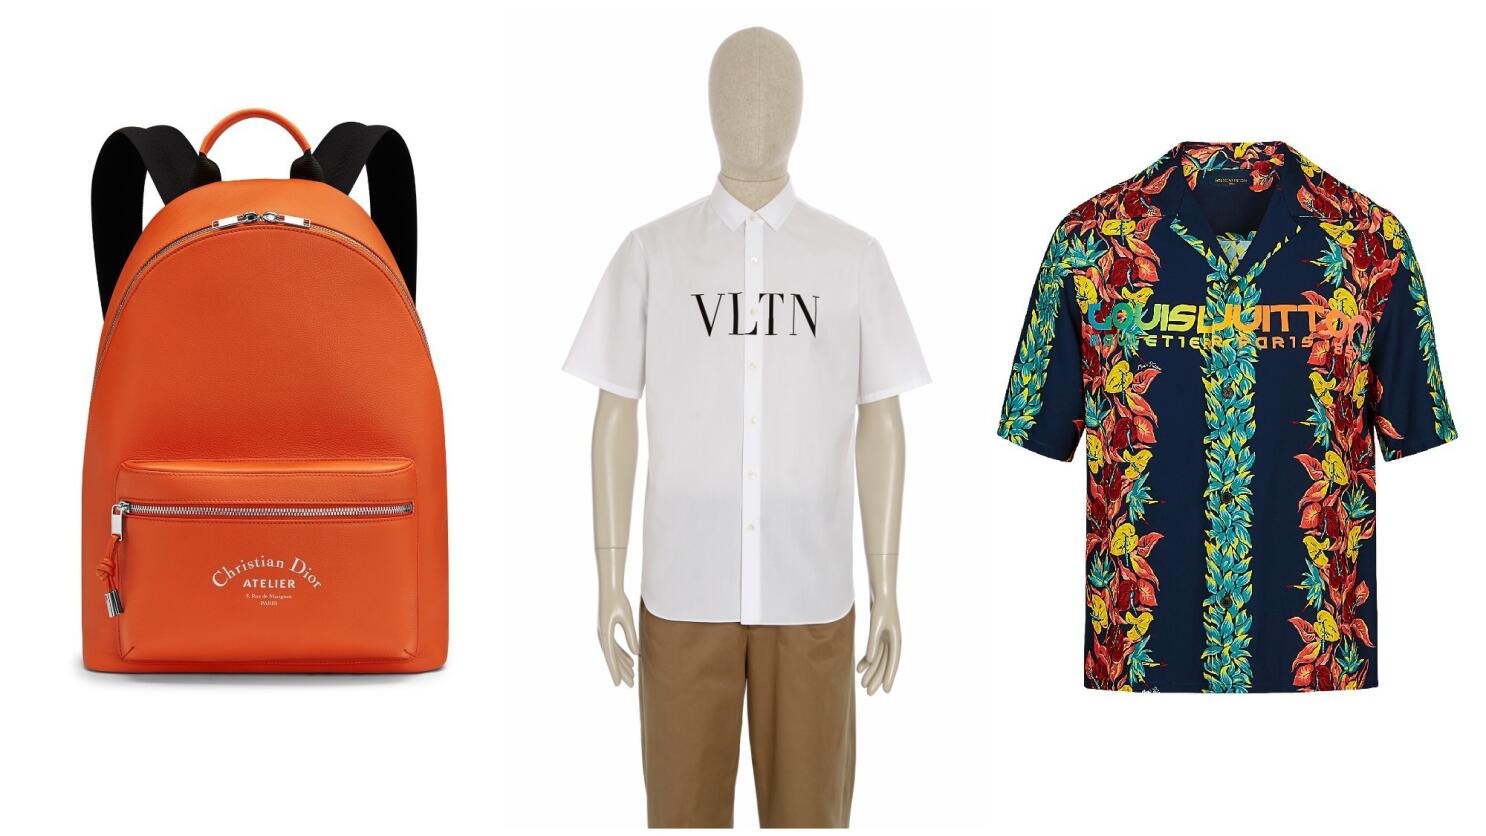 Add a dash of color to your wardrobe with Louis Vuitton's